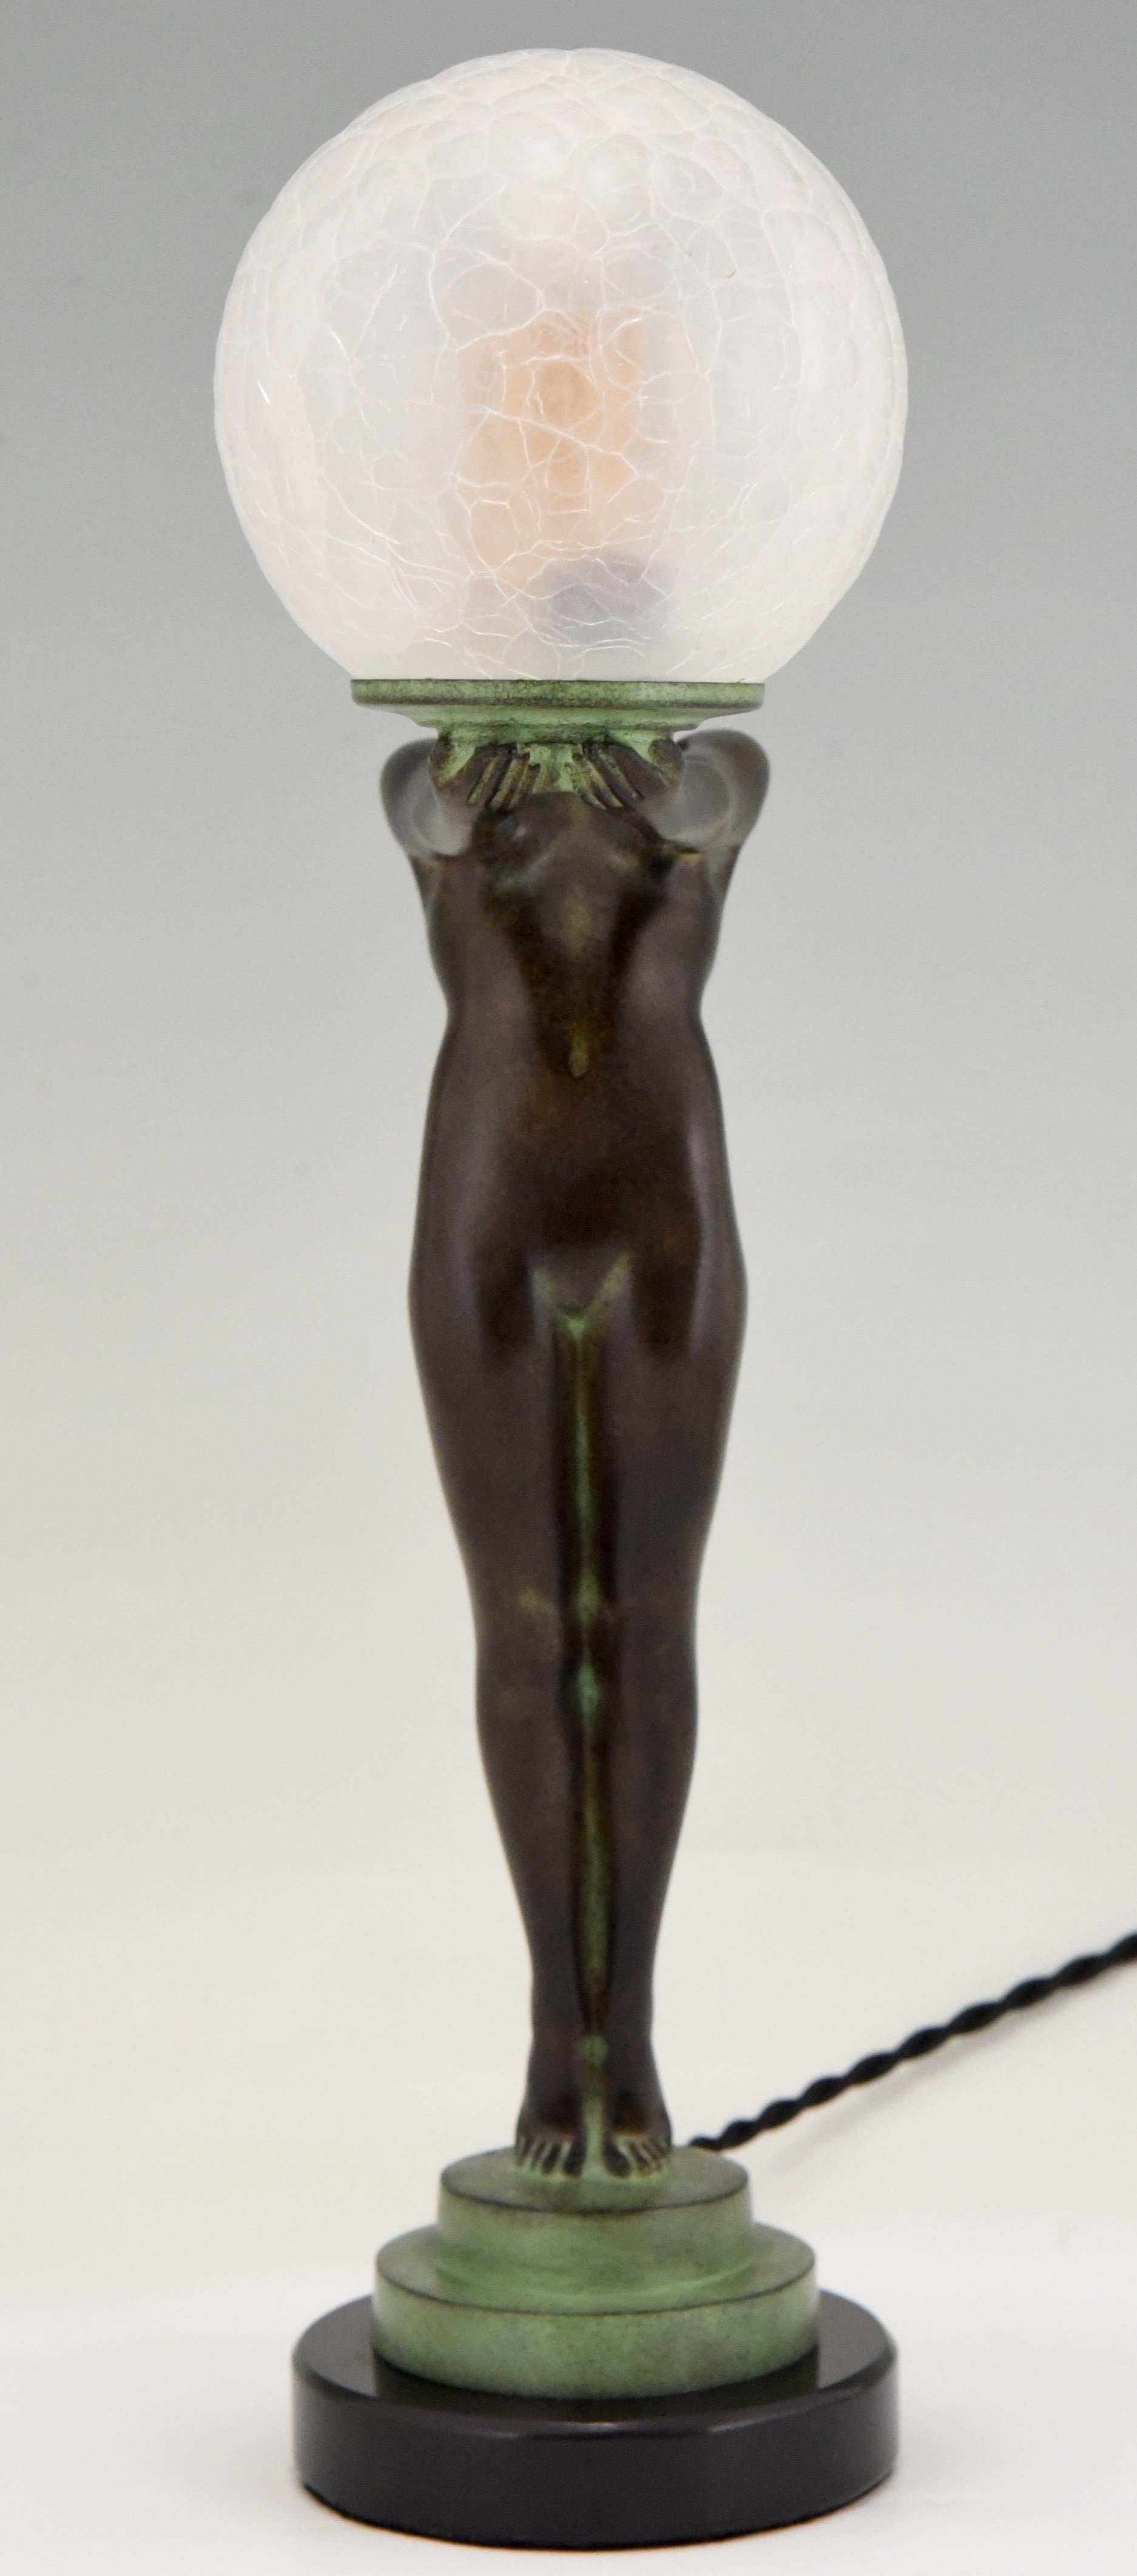 Patinated Art Deco Style Lamp CLARTE Standing Nude Holding a Glass Shade Max Le Verrier 